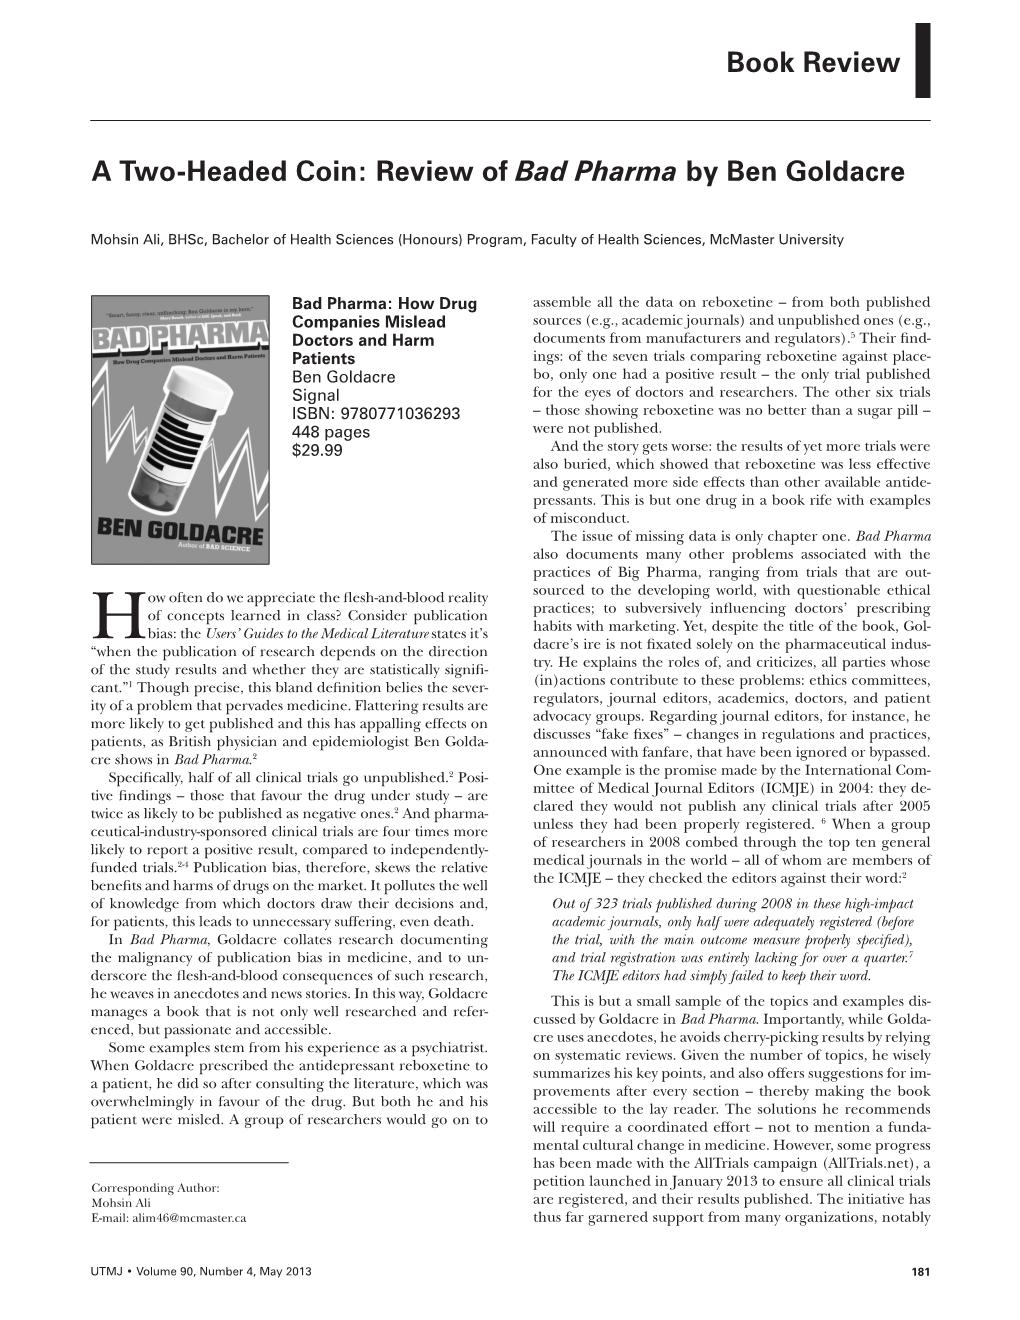 Review﻿ of Bad Pharma by Ben Goldacre